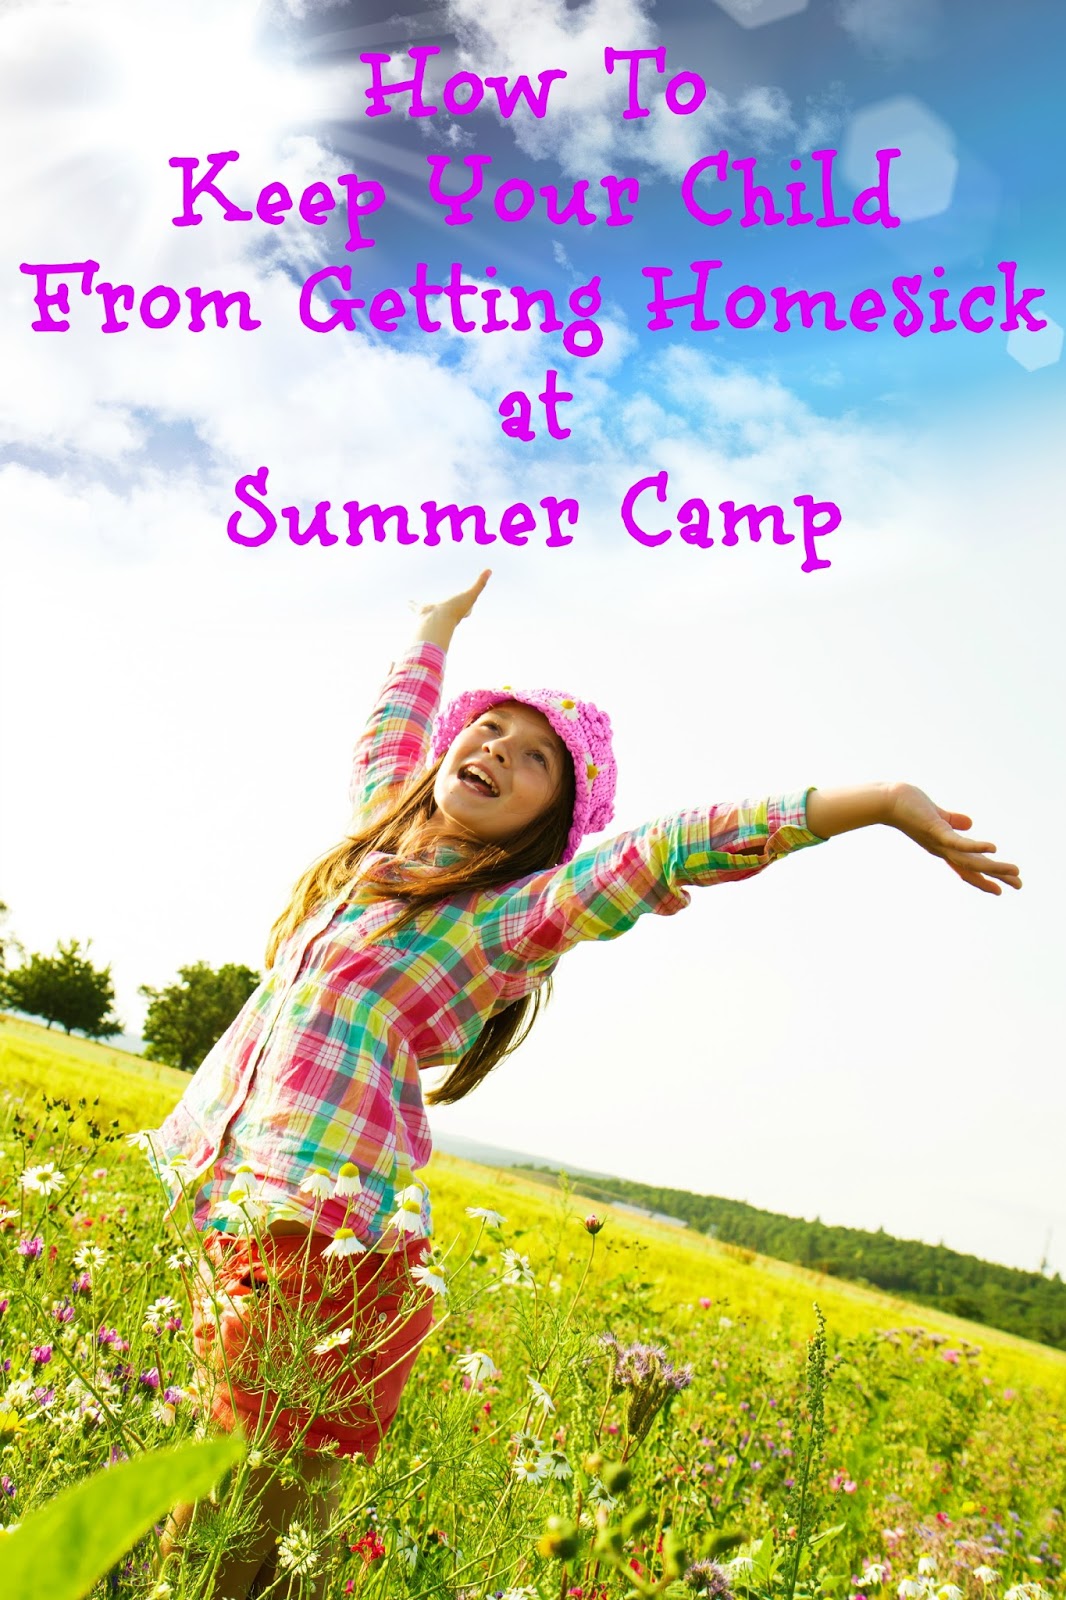 4 great tips to help keep your child from getting homesick at #summer #camp. #parenting